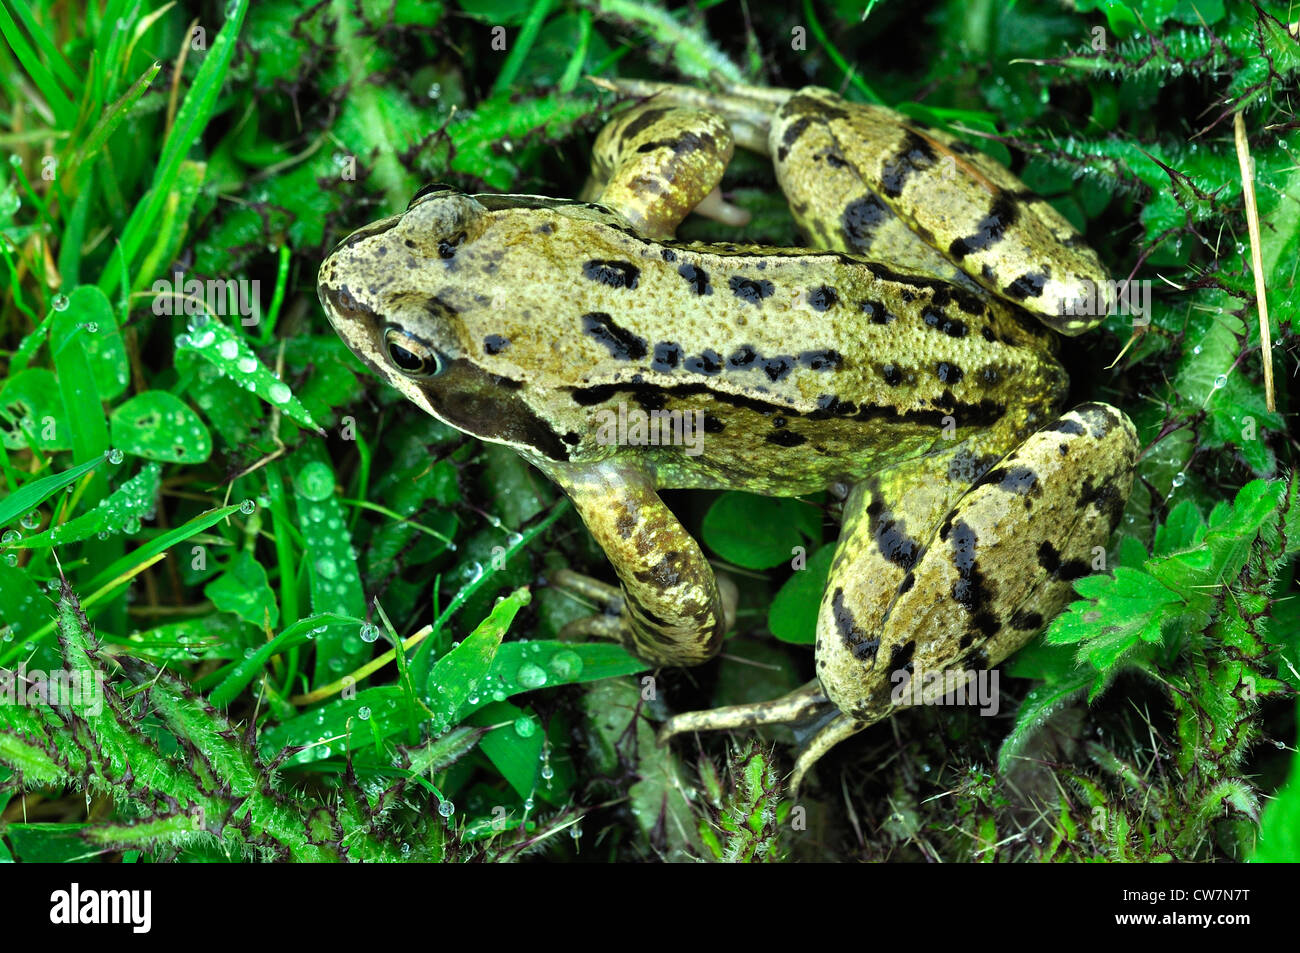 A common frog in the grass UK Stock Photo